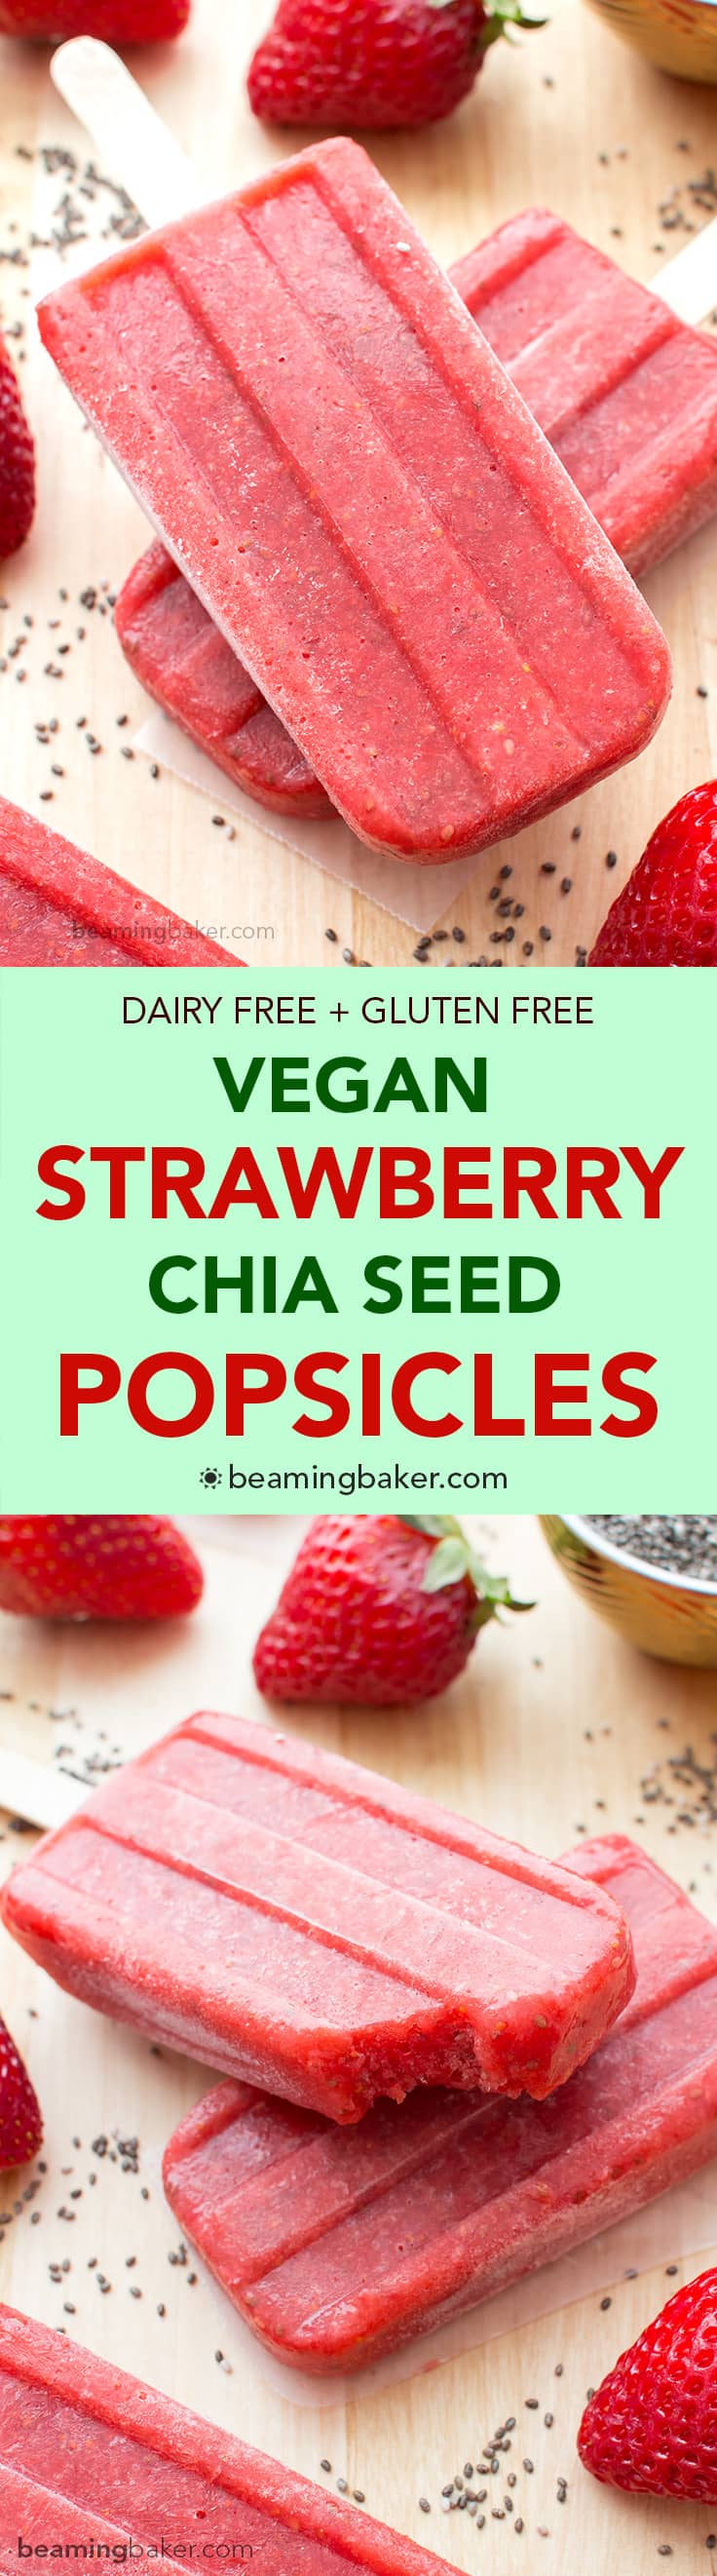 egan Strawberry Chia Seed Popsicles (V+GF): a 3 ingredient recipe for delicious, refreshing strawberry popsicles bursting with chia seeds. #Vegan #DairyFree #GlutenFree | BeamingBaker.com